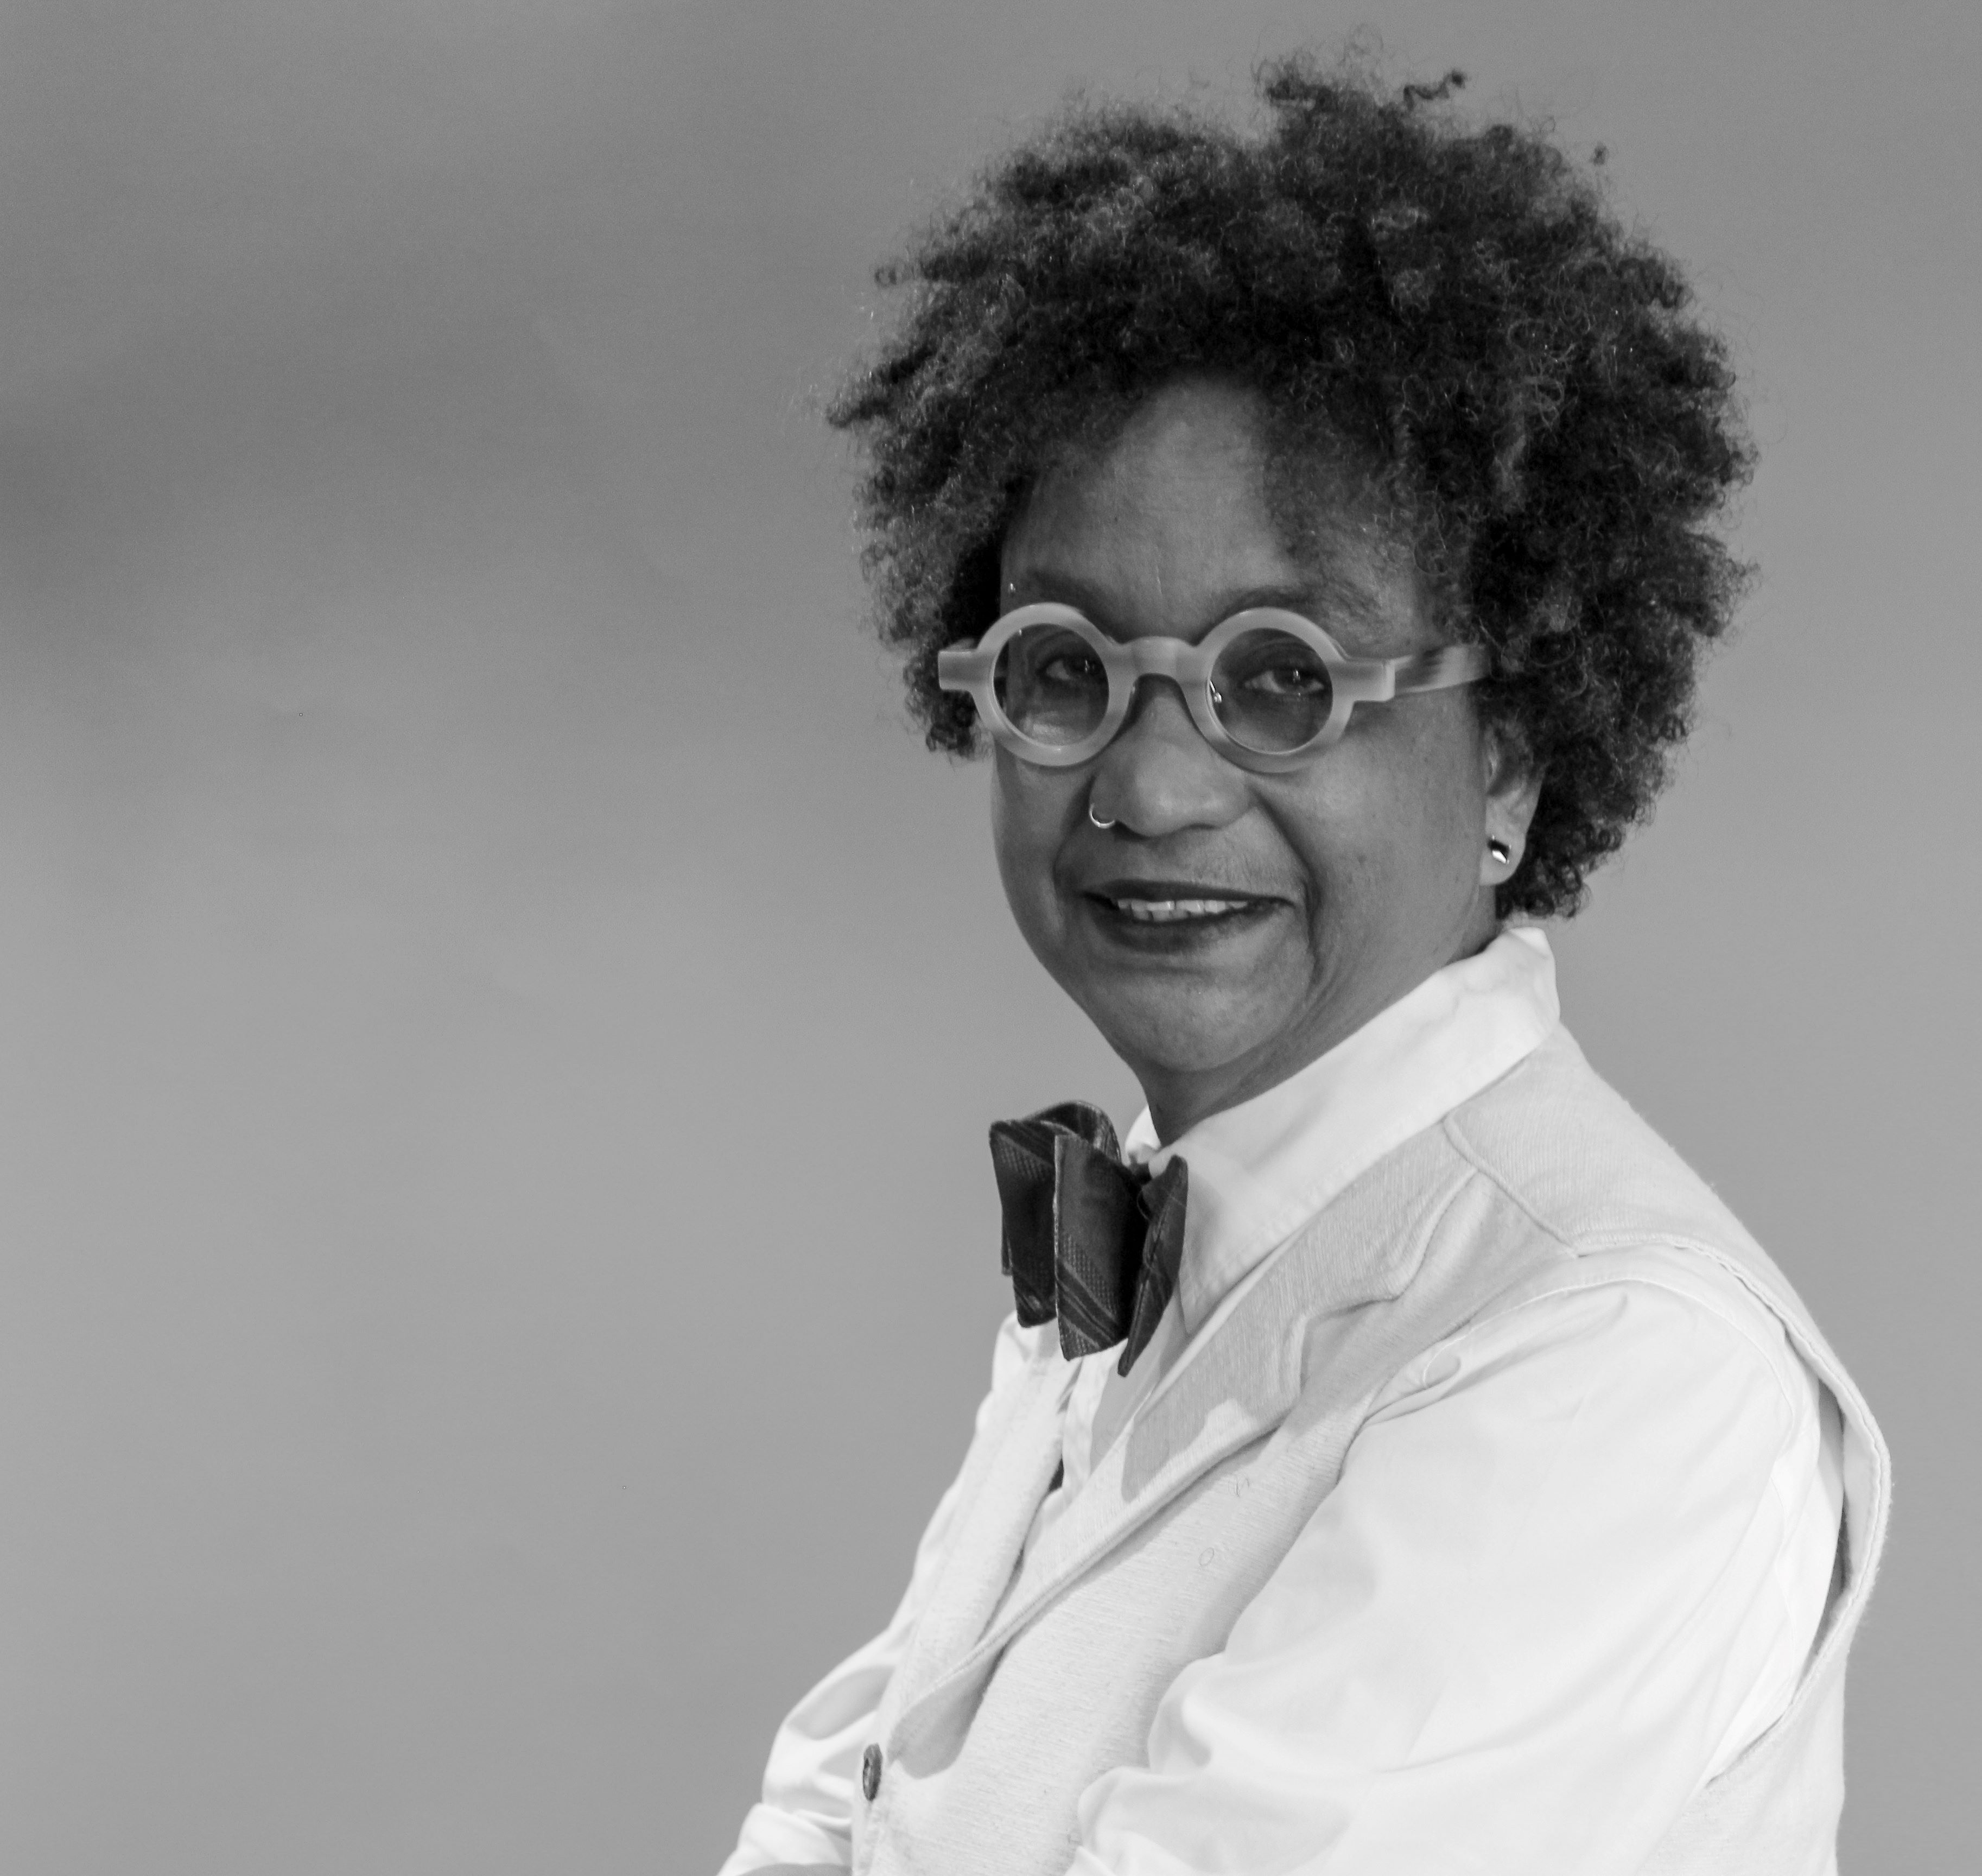 Person with curly hair and round glasses wearing dress shirt with bowtie in black and white